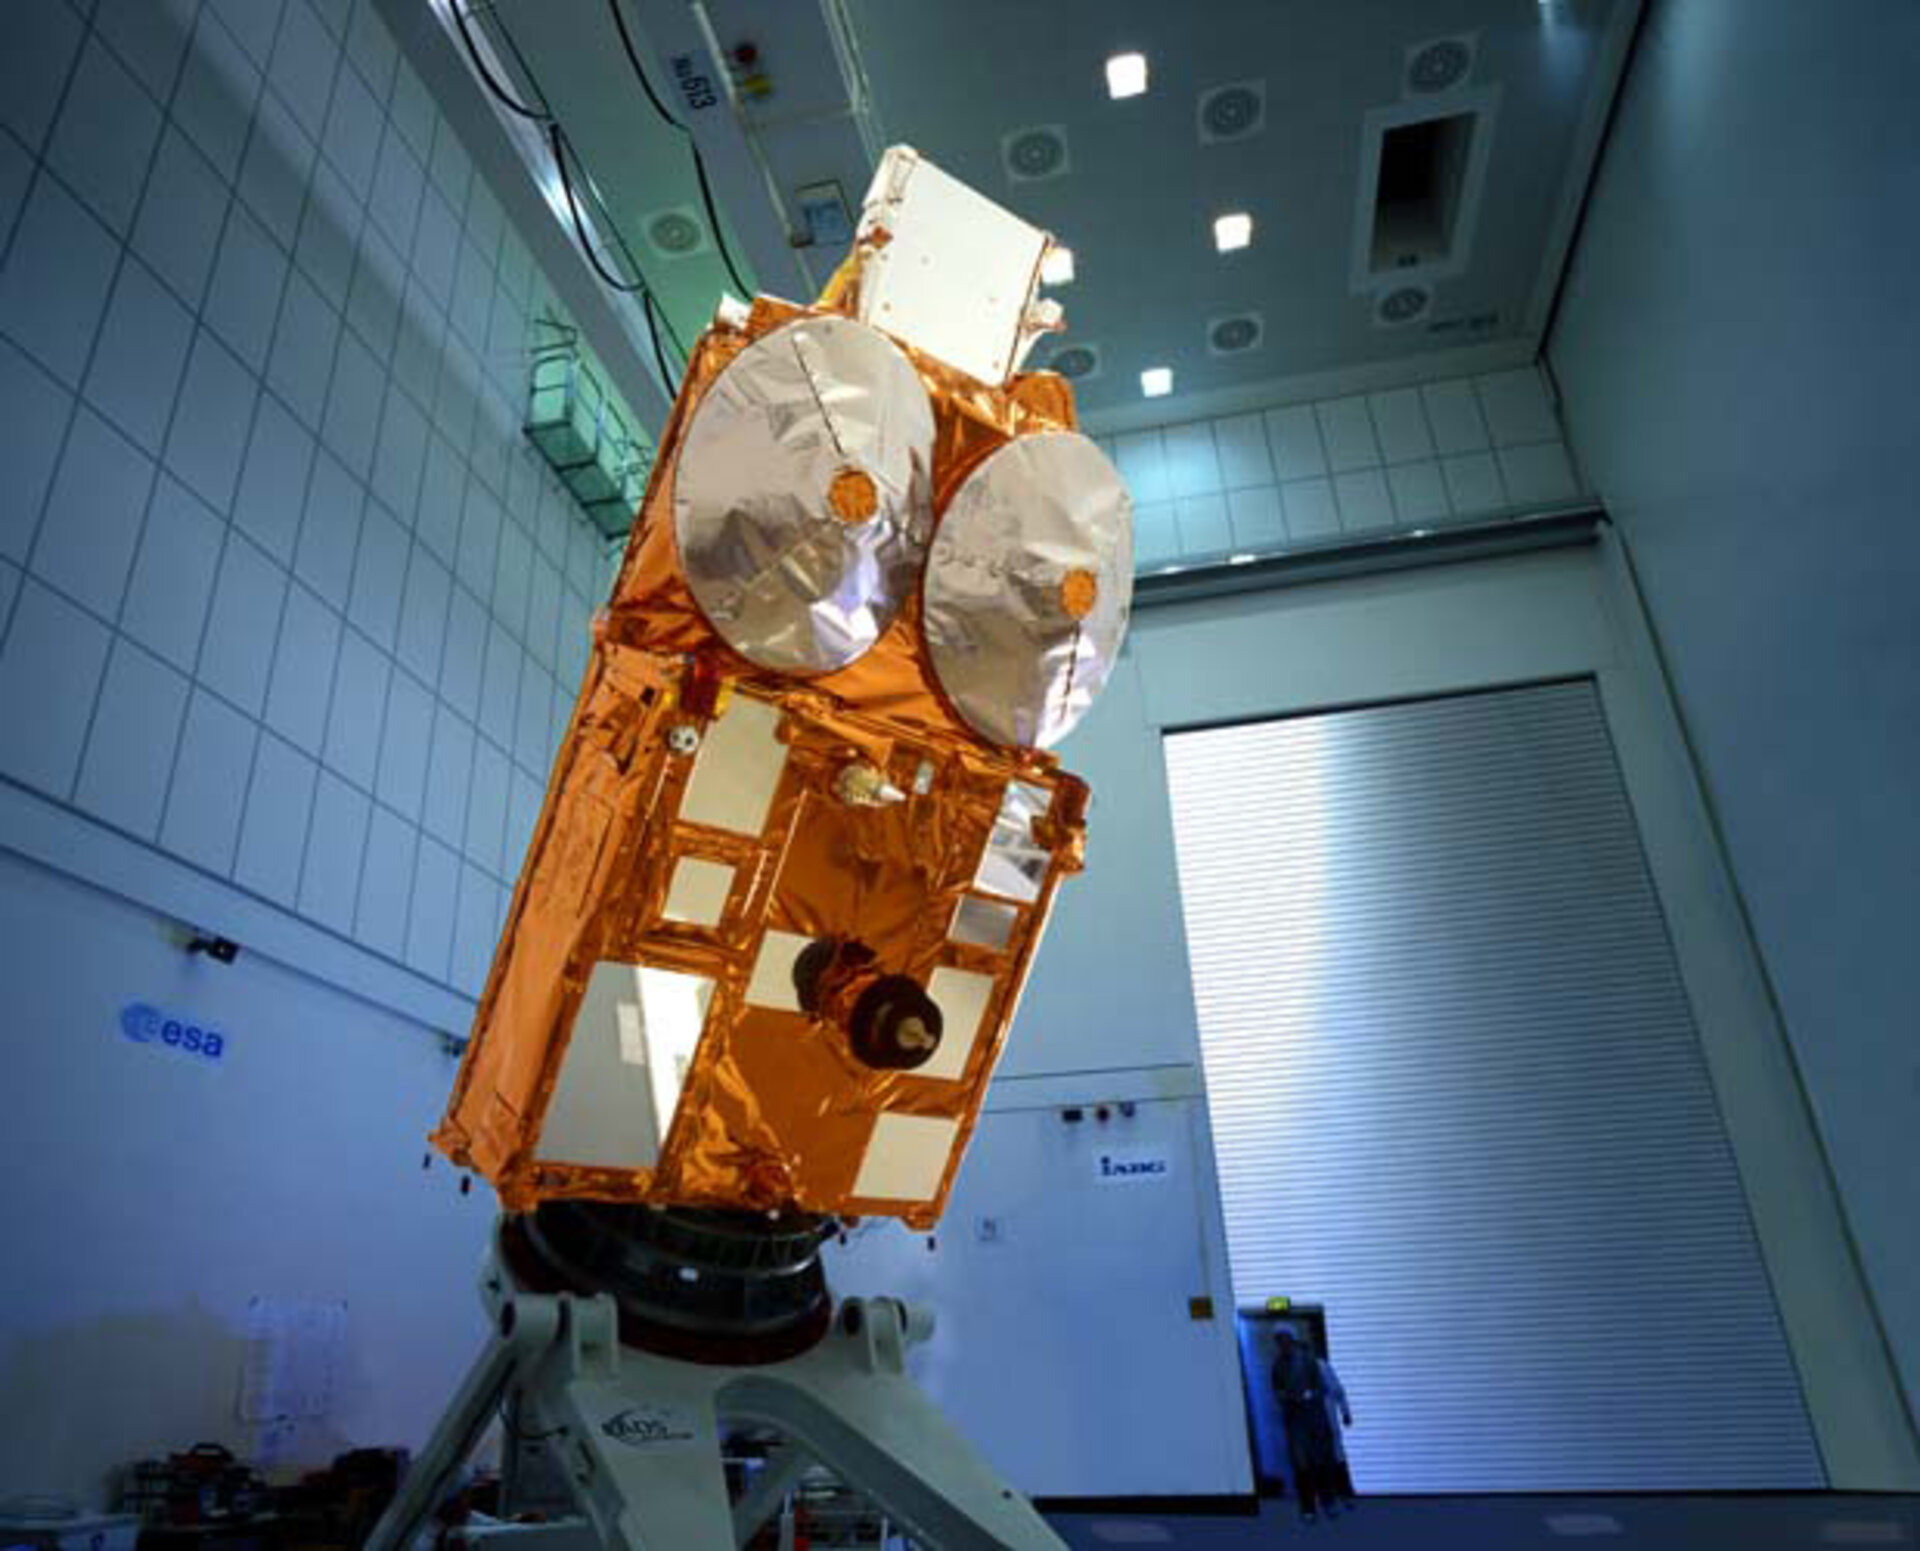 CryoSat in the cleanroom